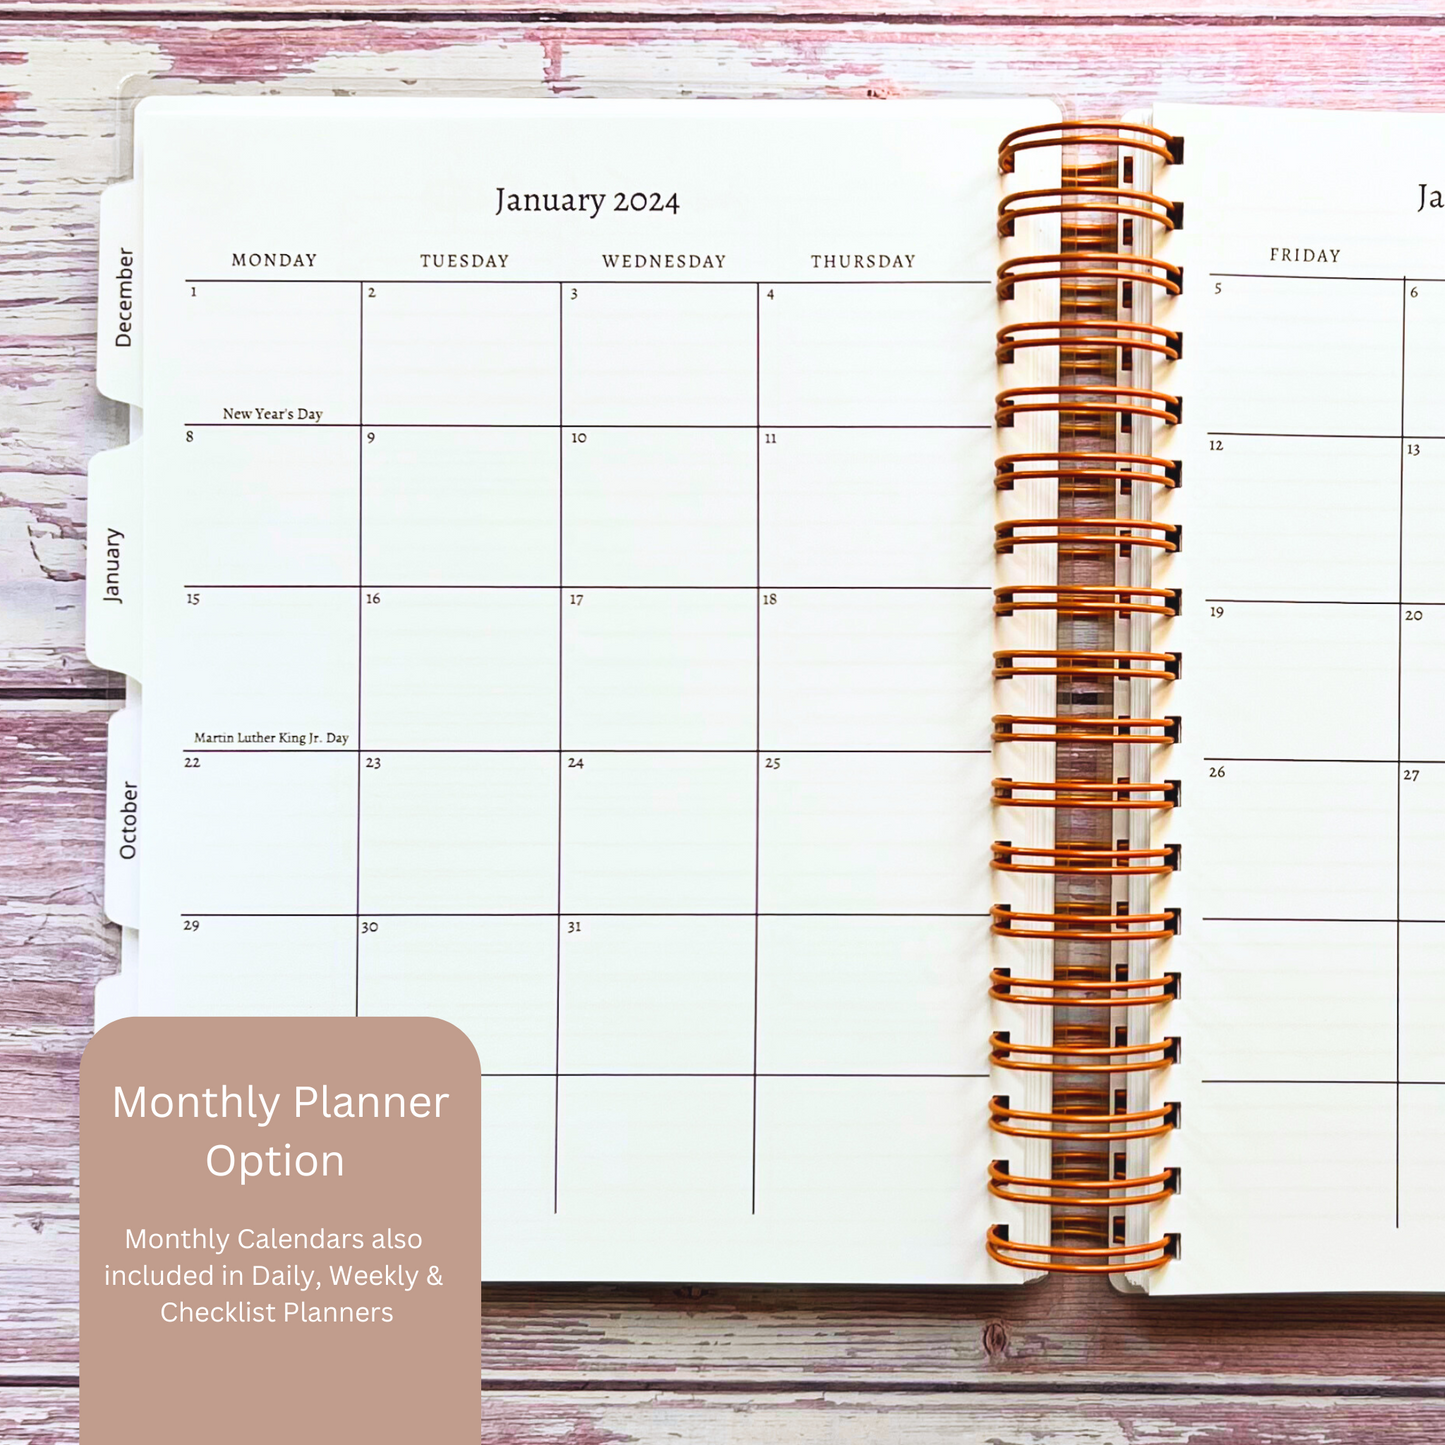 Personalized Monthly Planner - Floral Peacock